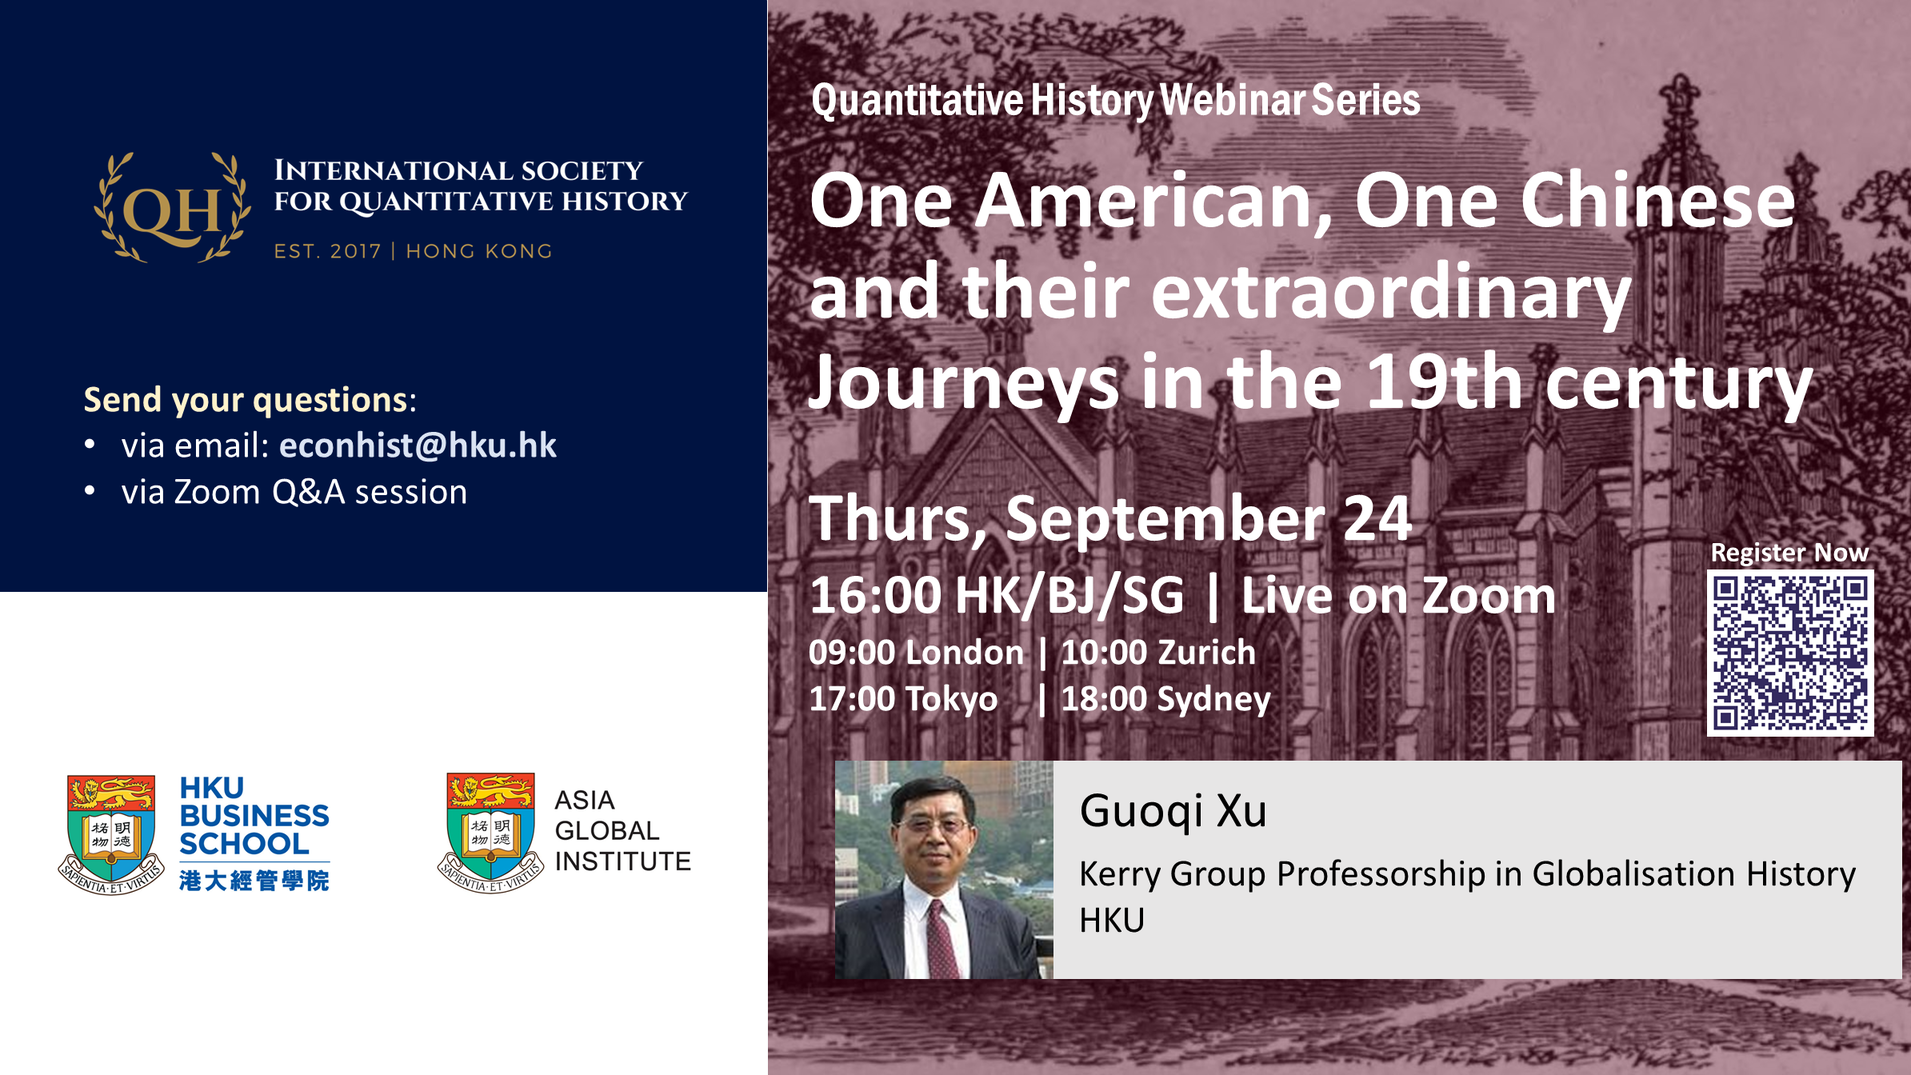 Quantitative History Webinar Series - One American, One Chinese and their extraordinary Journeys in the 19th century